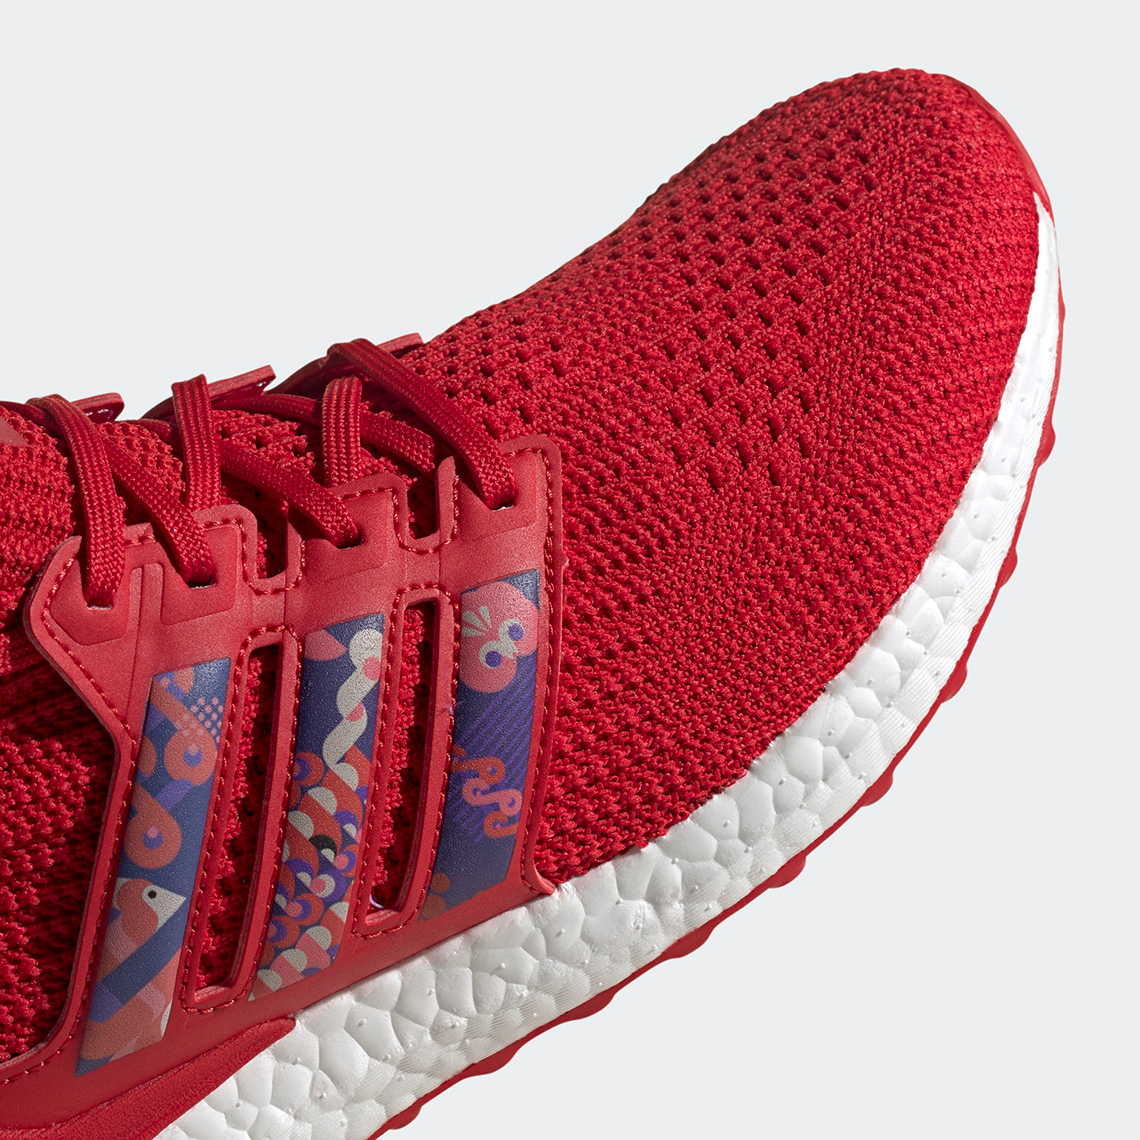 Ultra Boost Dna Chinese New Yearlimited Special Sales And Special Offers Women S Men S Sneakers Sports Shoes Shop Athletic Shoes Online Off 68 Free Shipping Fast Shippment